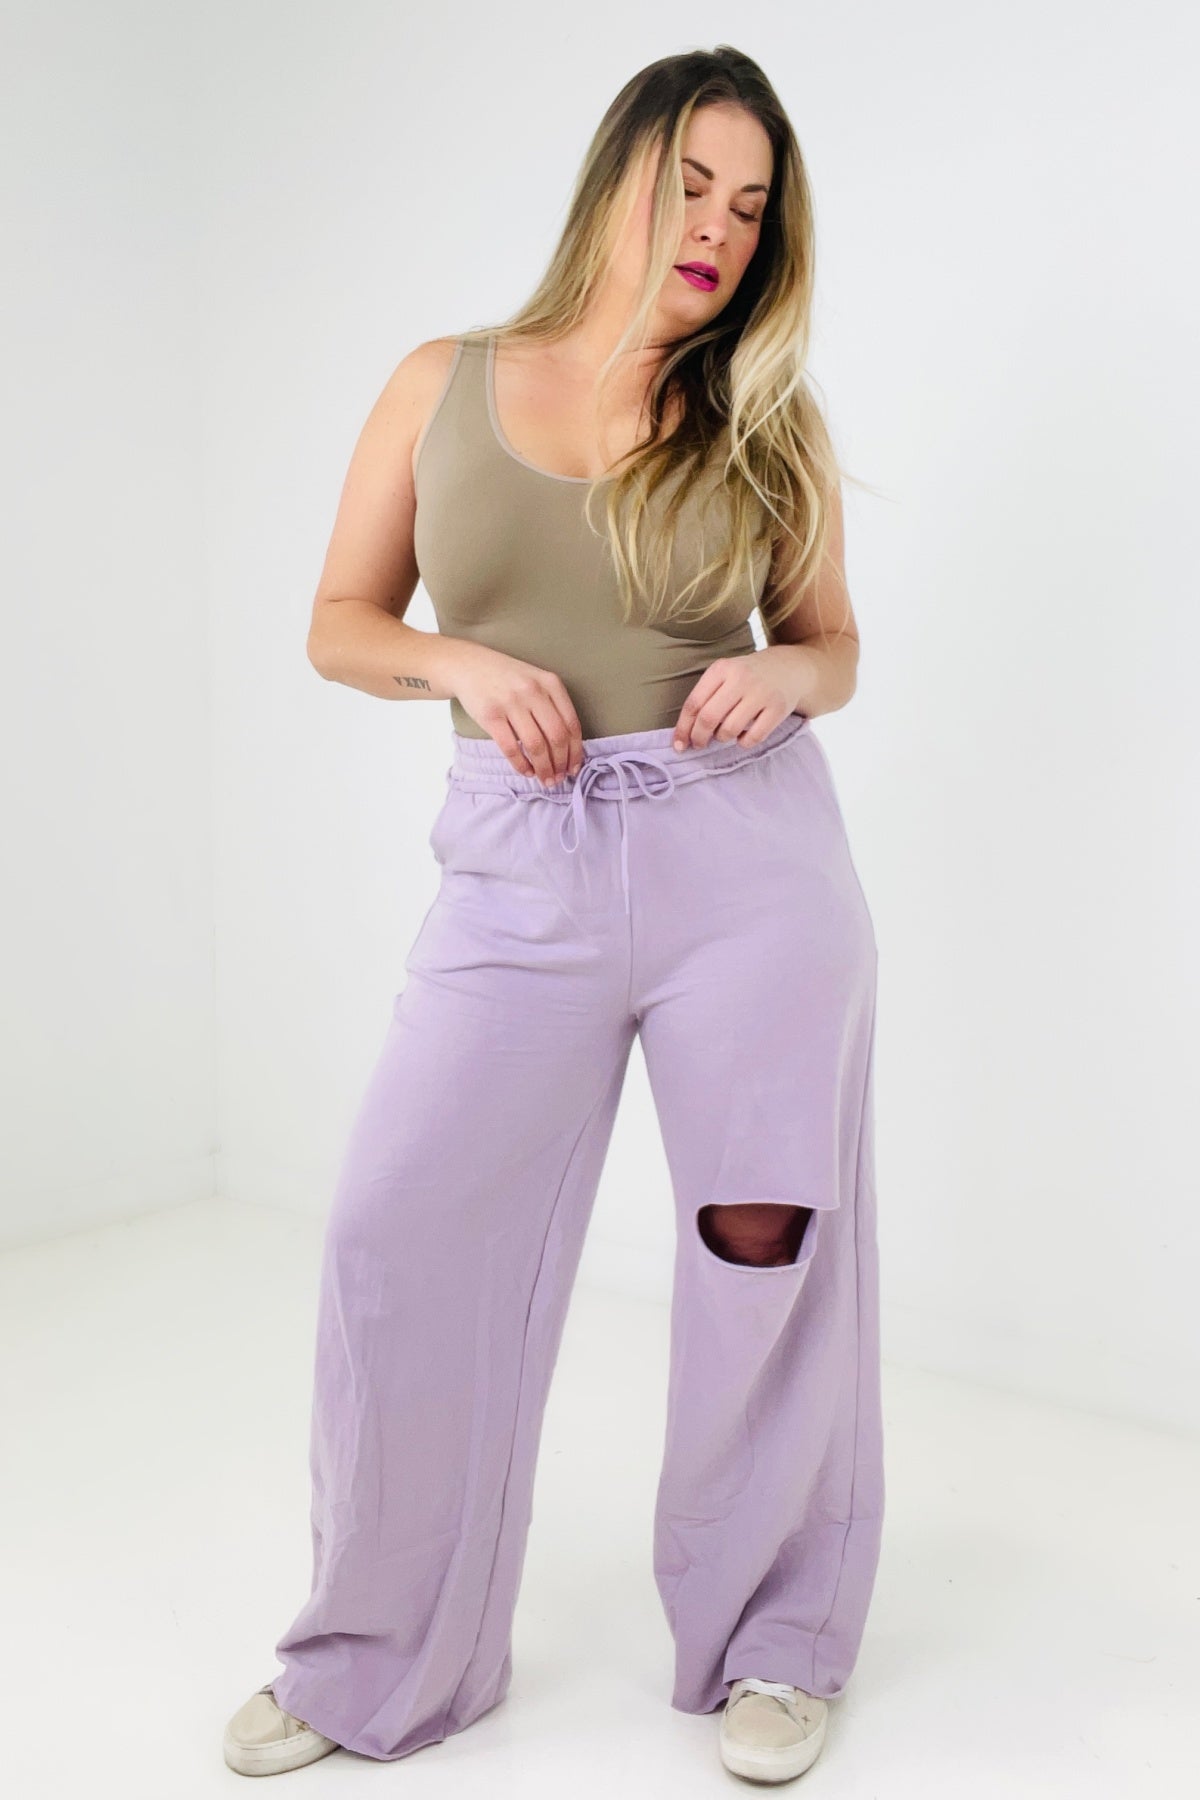 Zenana Distressed Knee French Terry Sweats With Pockets - New Colors Boutique 276